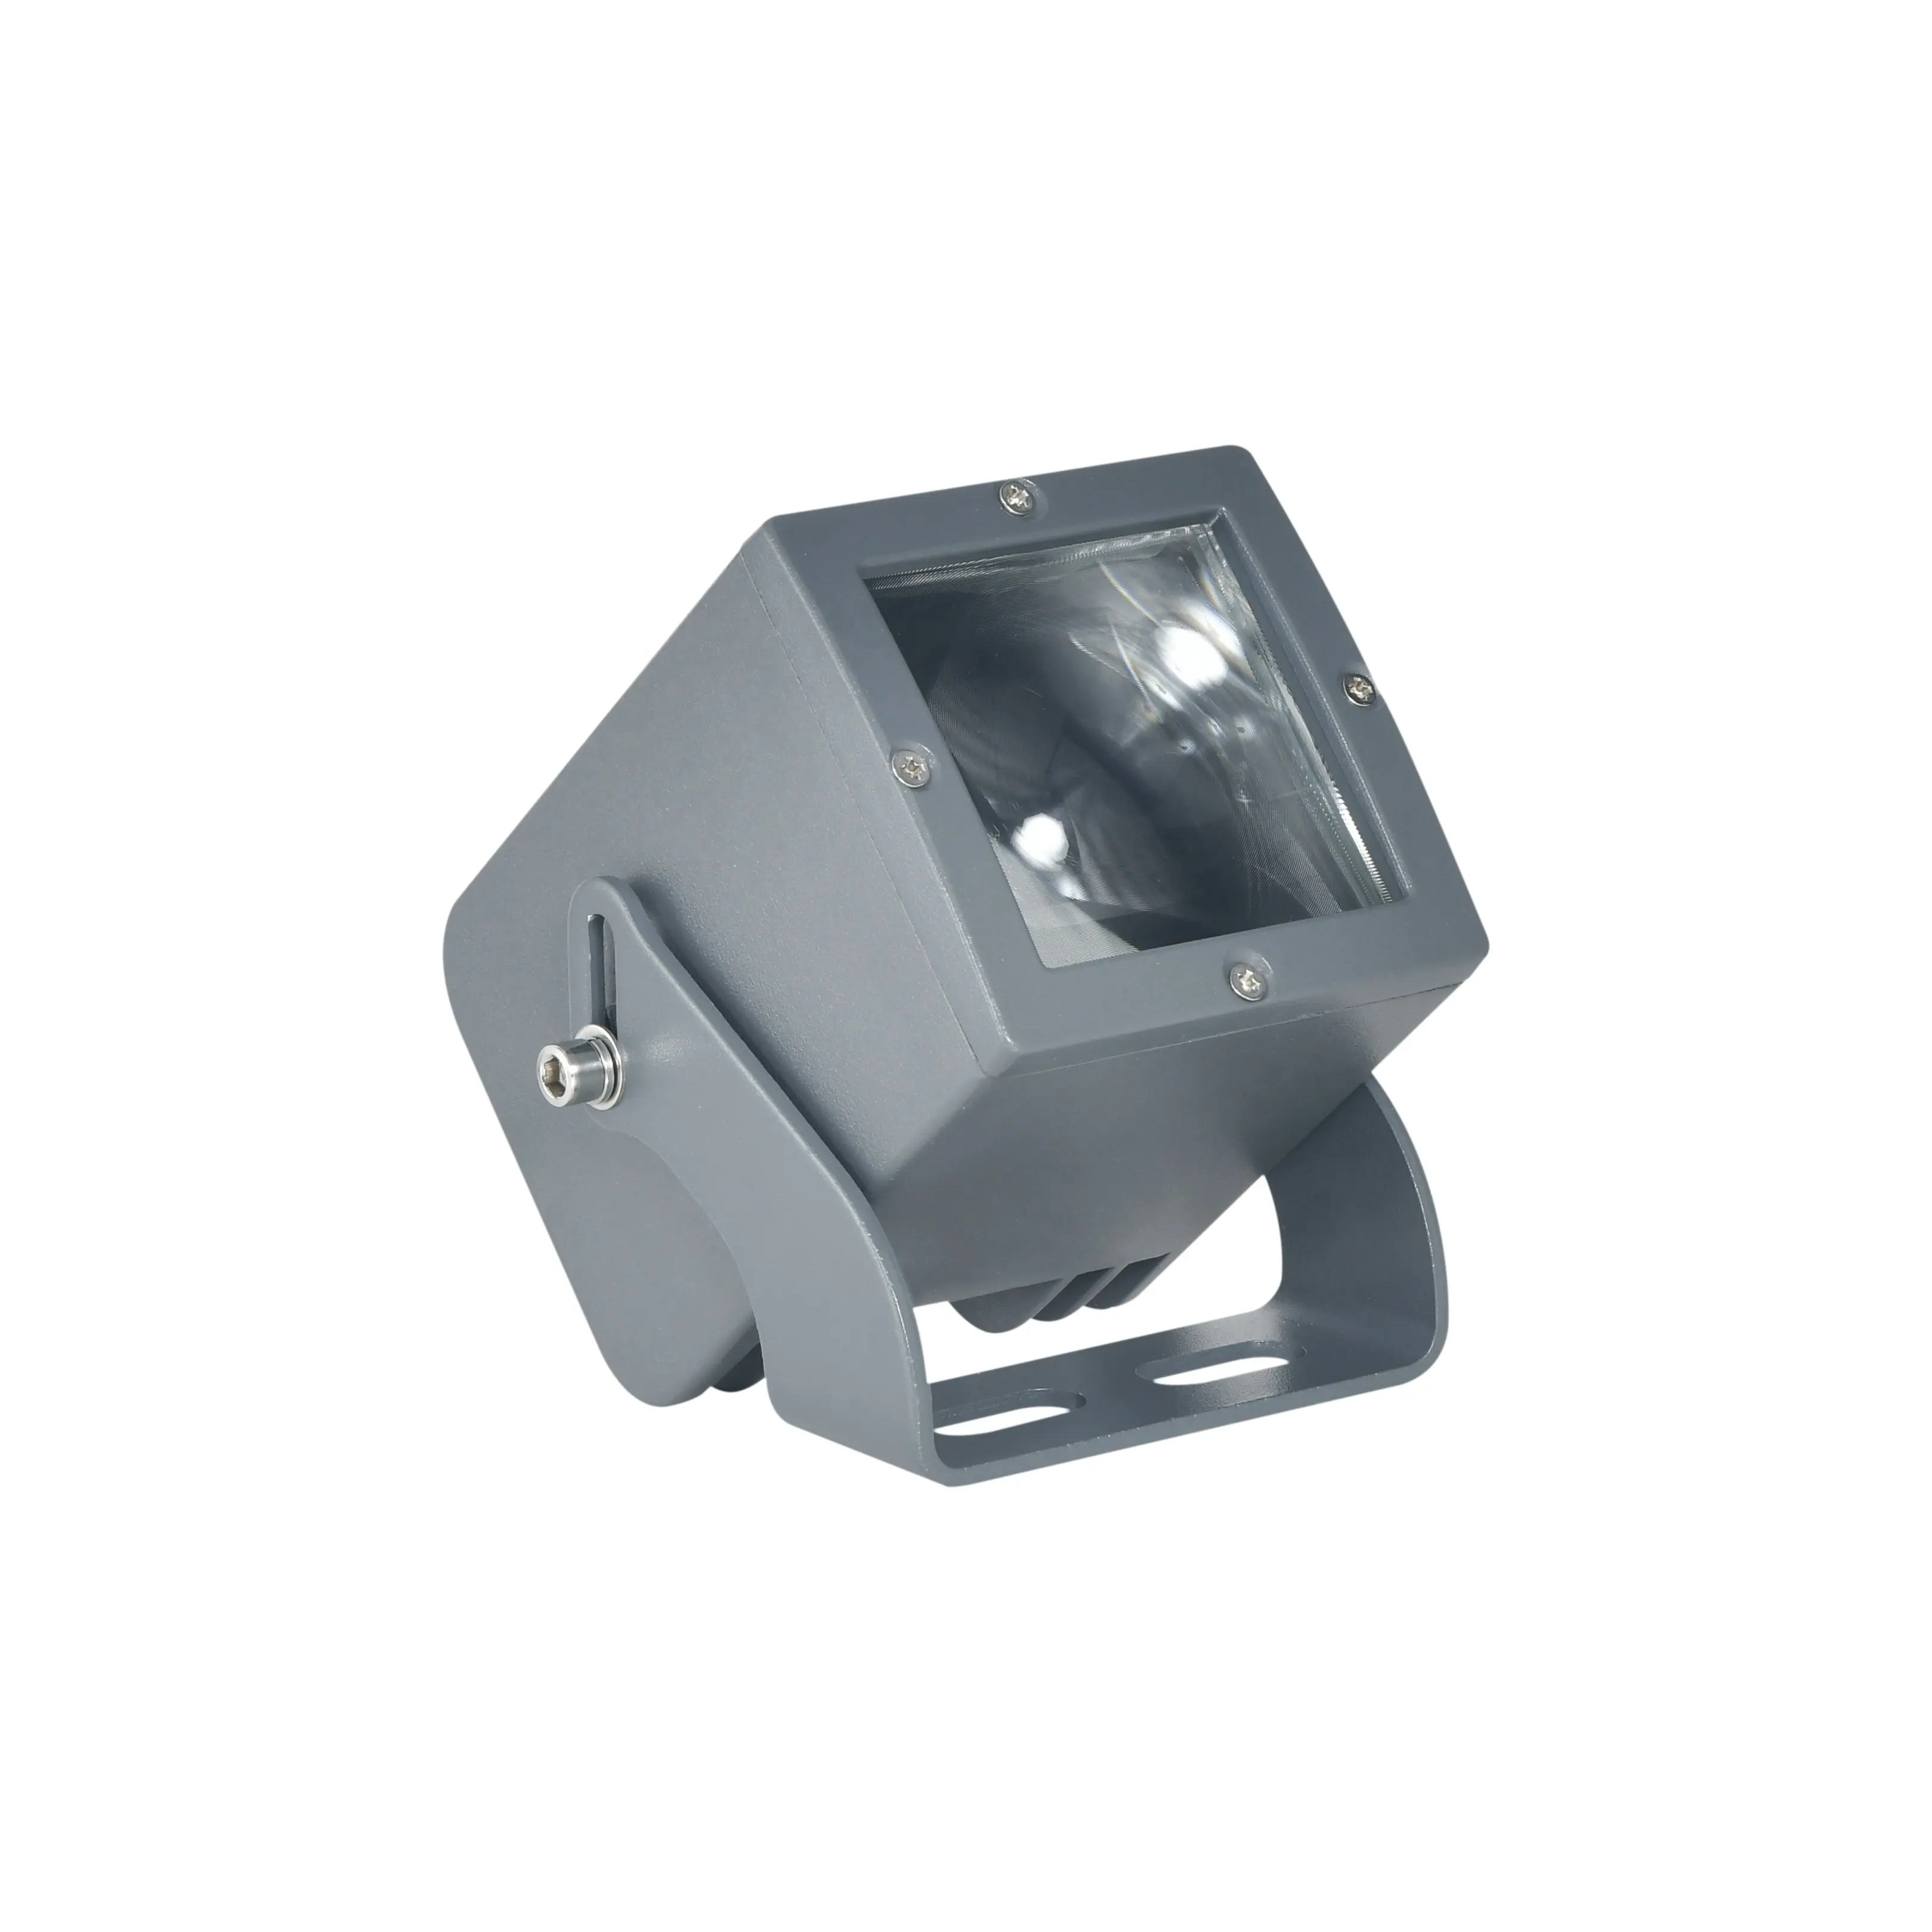 Narrow beam Angle 1degree 10W Waterproof LED flood light outdoor IP66 Led outdoor spotlight for light up building wall